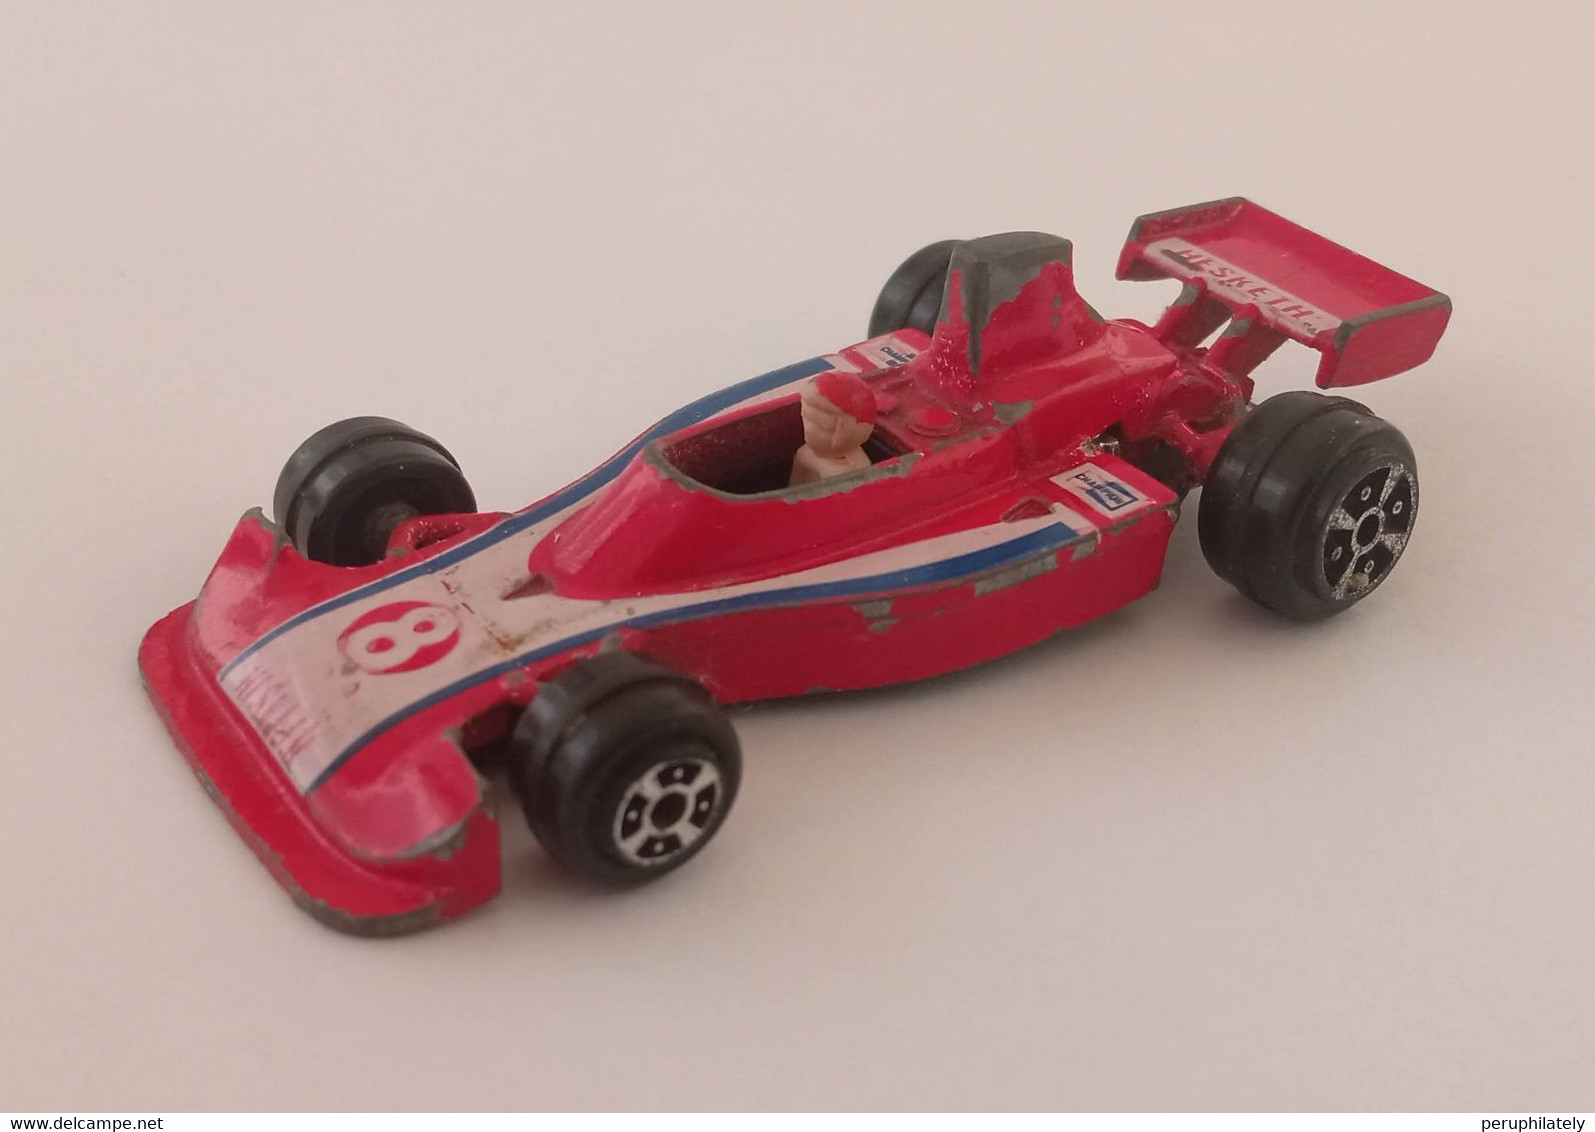 Yatming Hesketh 308 No 1308 Red Hesketh 8 , Vintage Diecast Toy Indy Car - R/C Scale Models